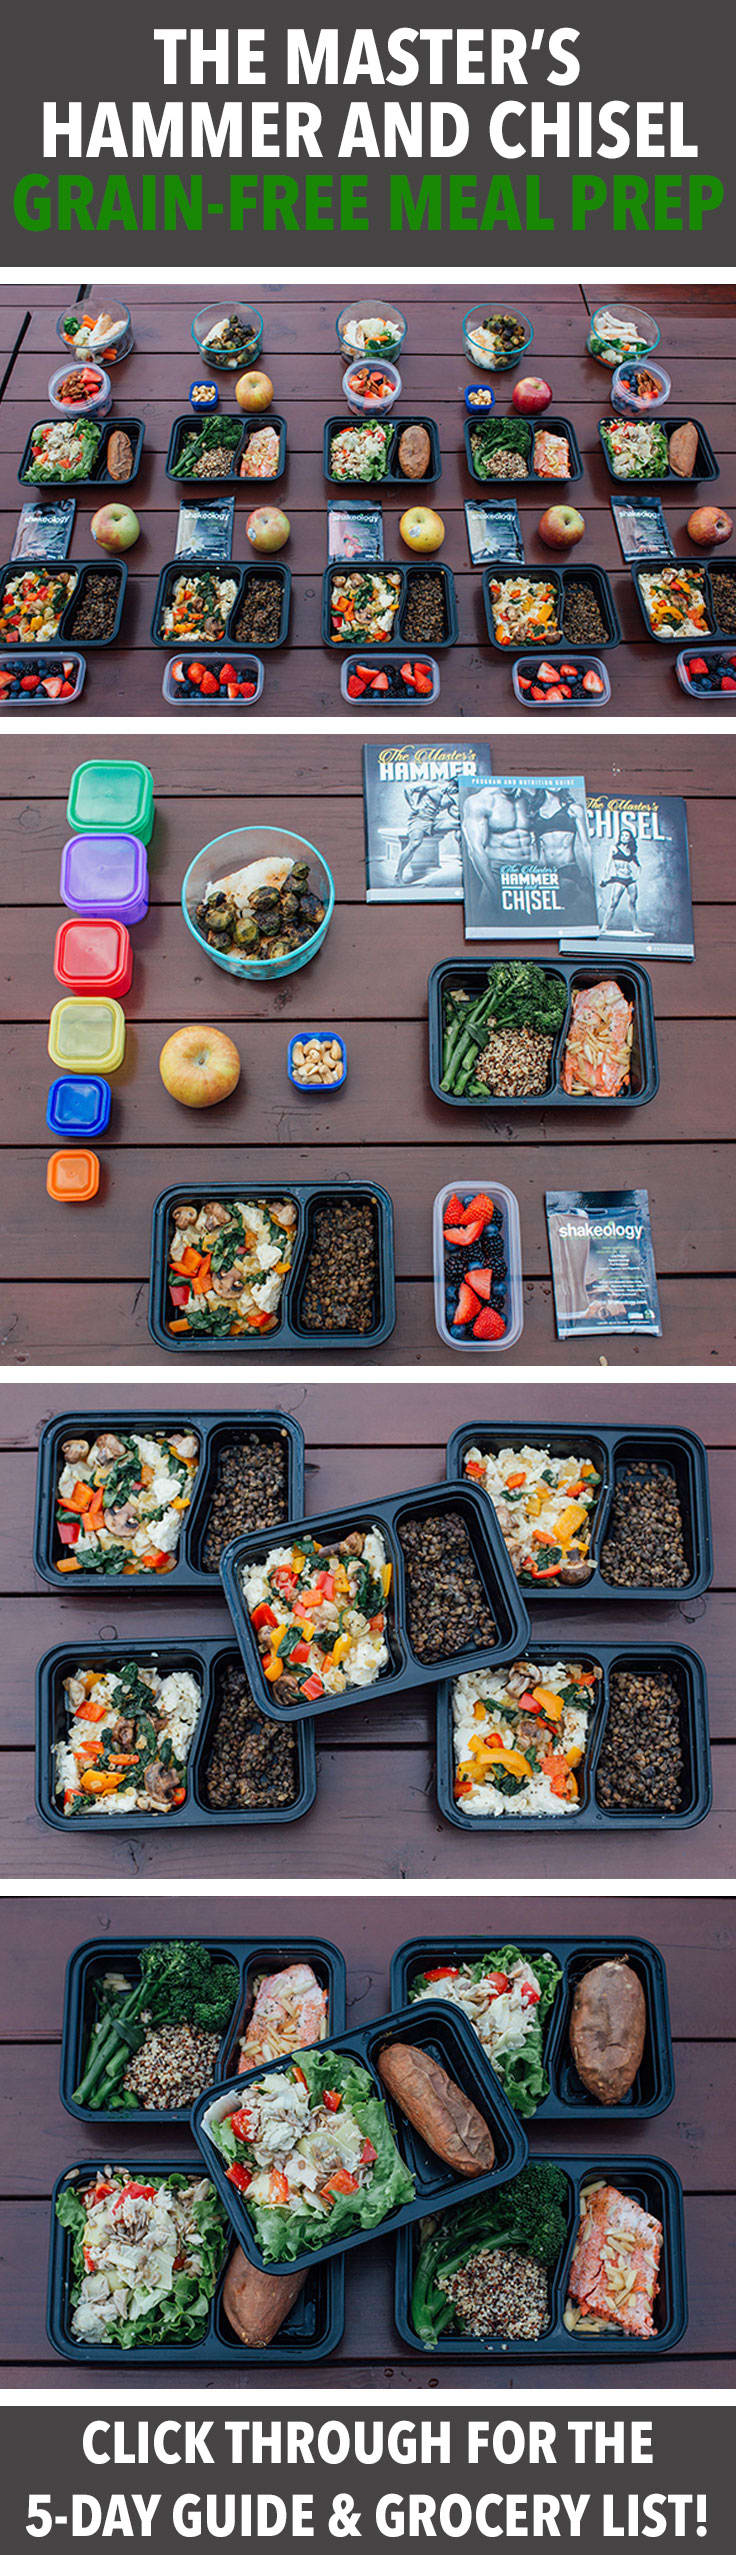 Go Grain Free with This 1,500-1,800 Calorie Meal Prep For The Master's Hammer and Chisel